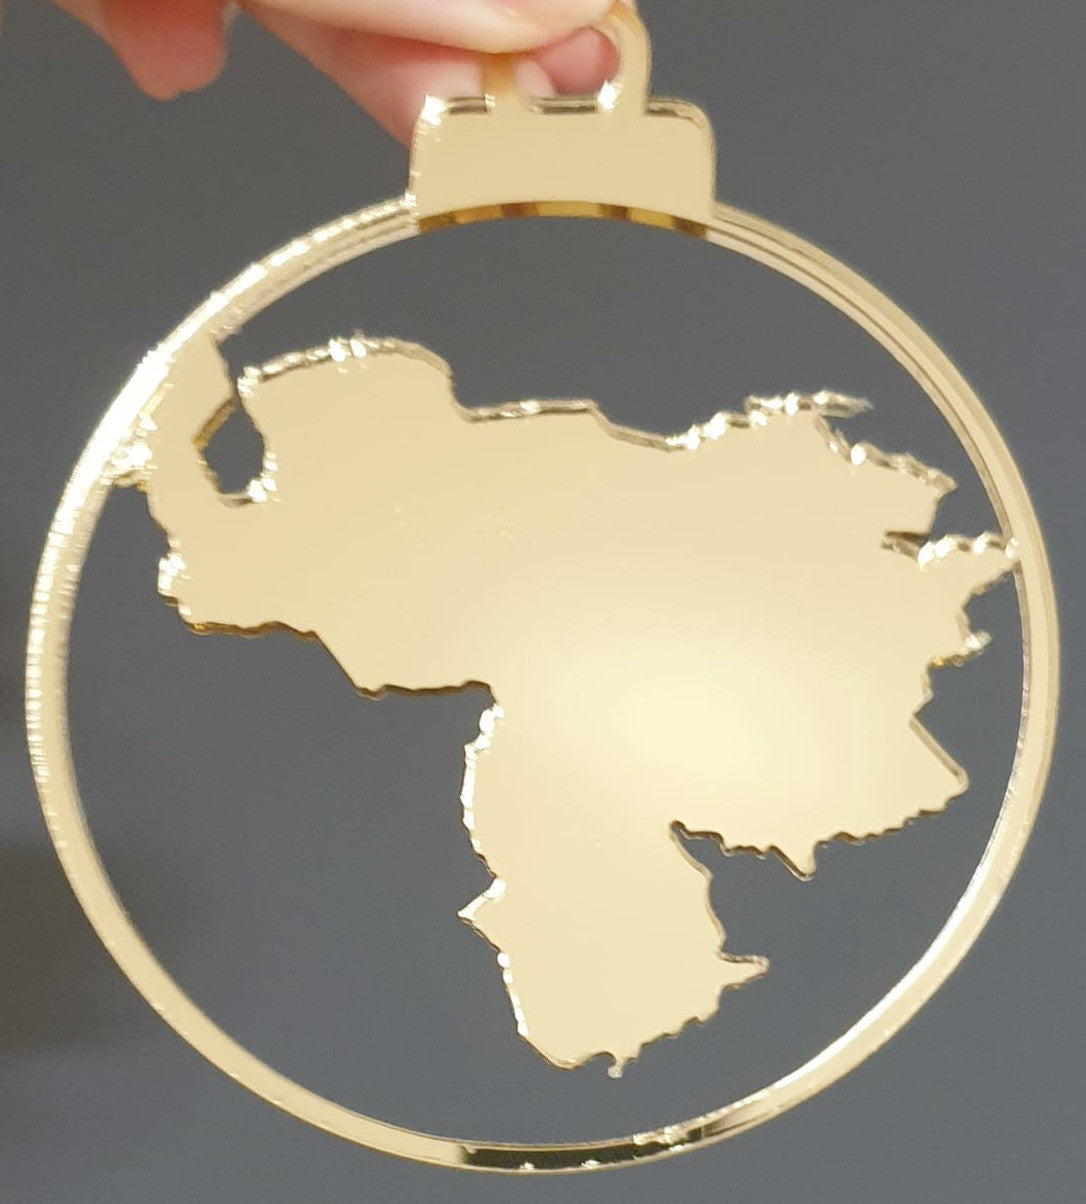 Country, Region, or City Ornament